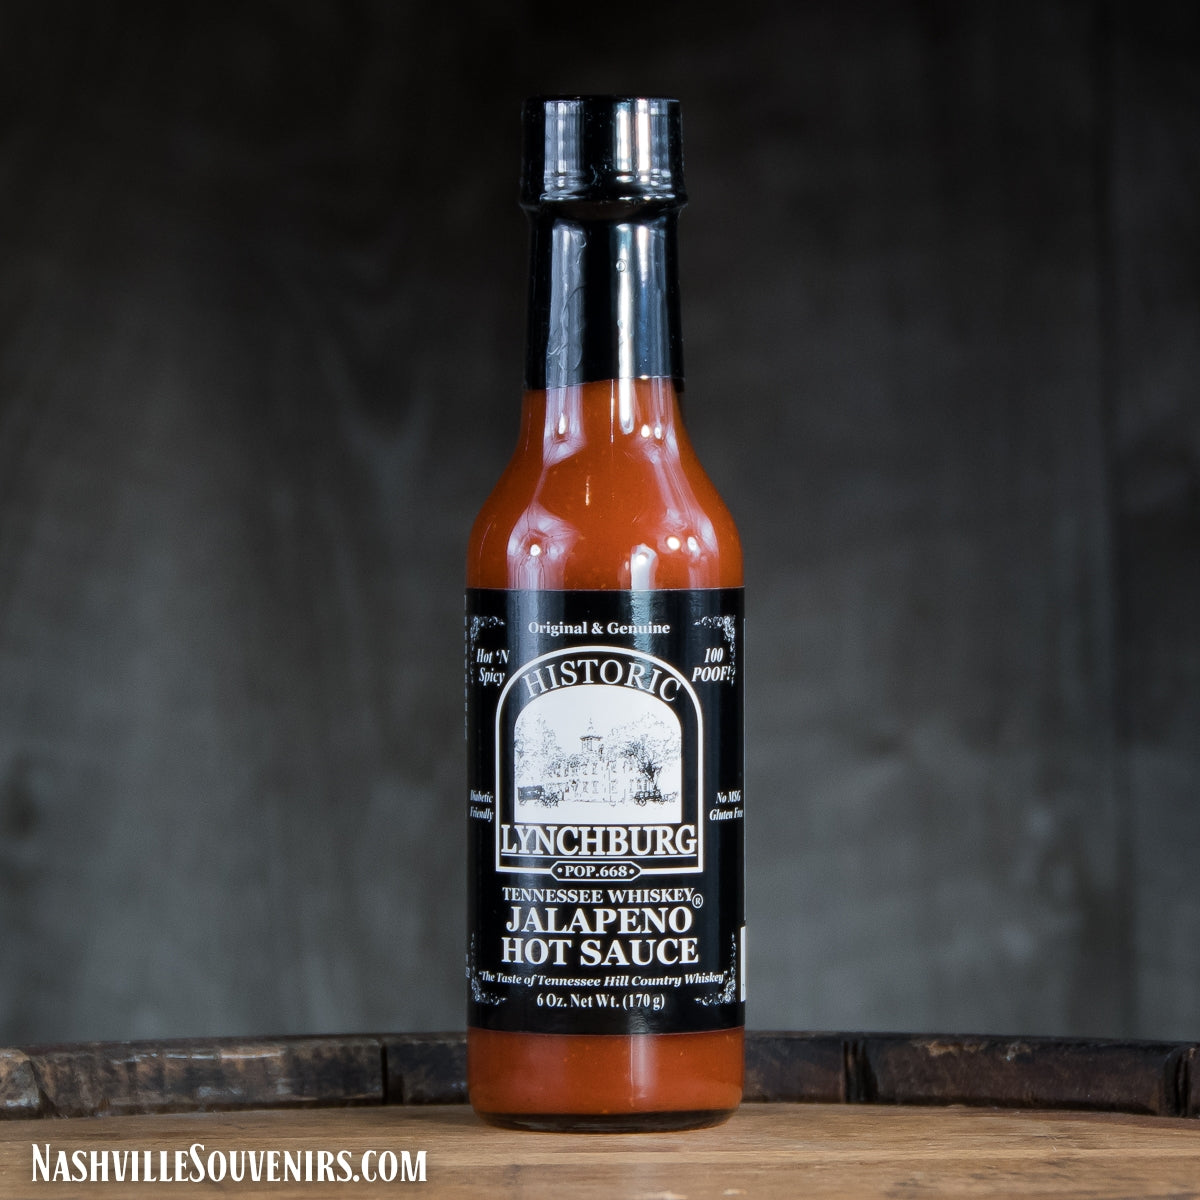 Wow! This Historic Lynchburg Jalapeno Hot Sauce is the real thing made in the hills of Tennessee.  FREE SHIPPING on all US orders over $75!